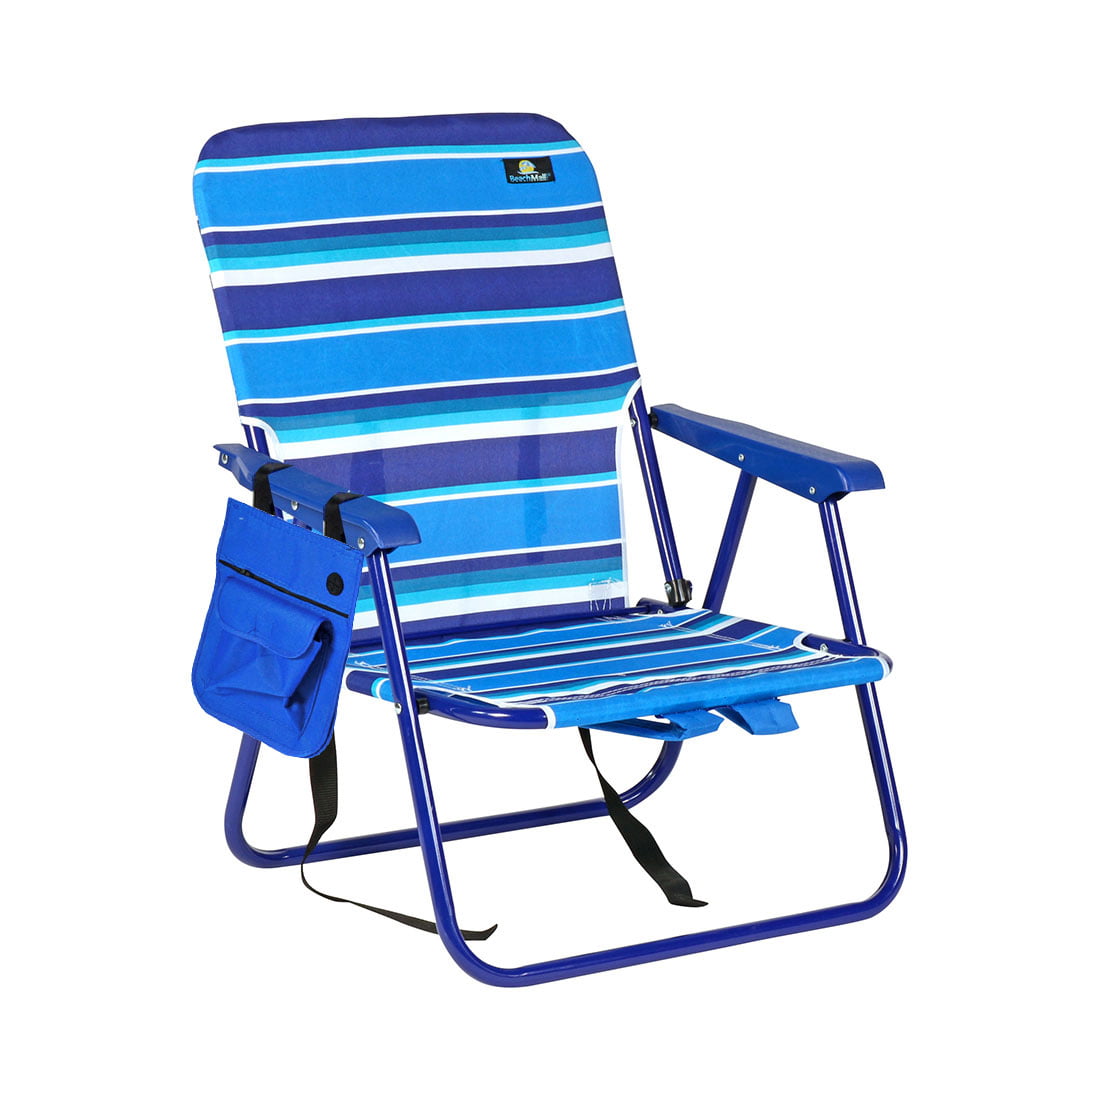 New Beach Chair Pocket Camp for Simple Design